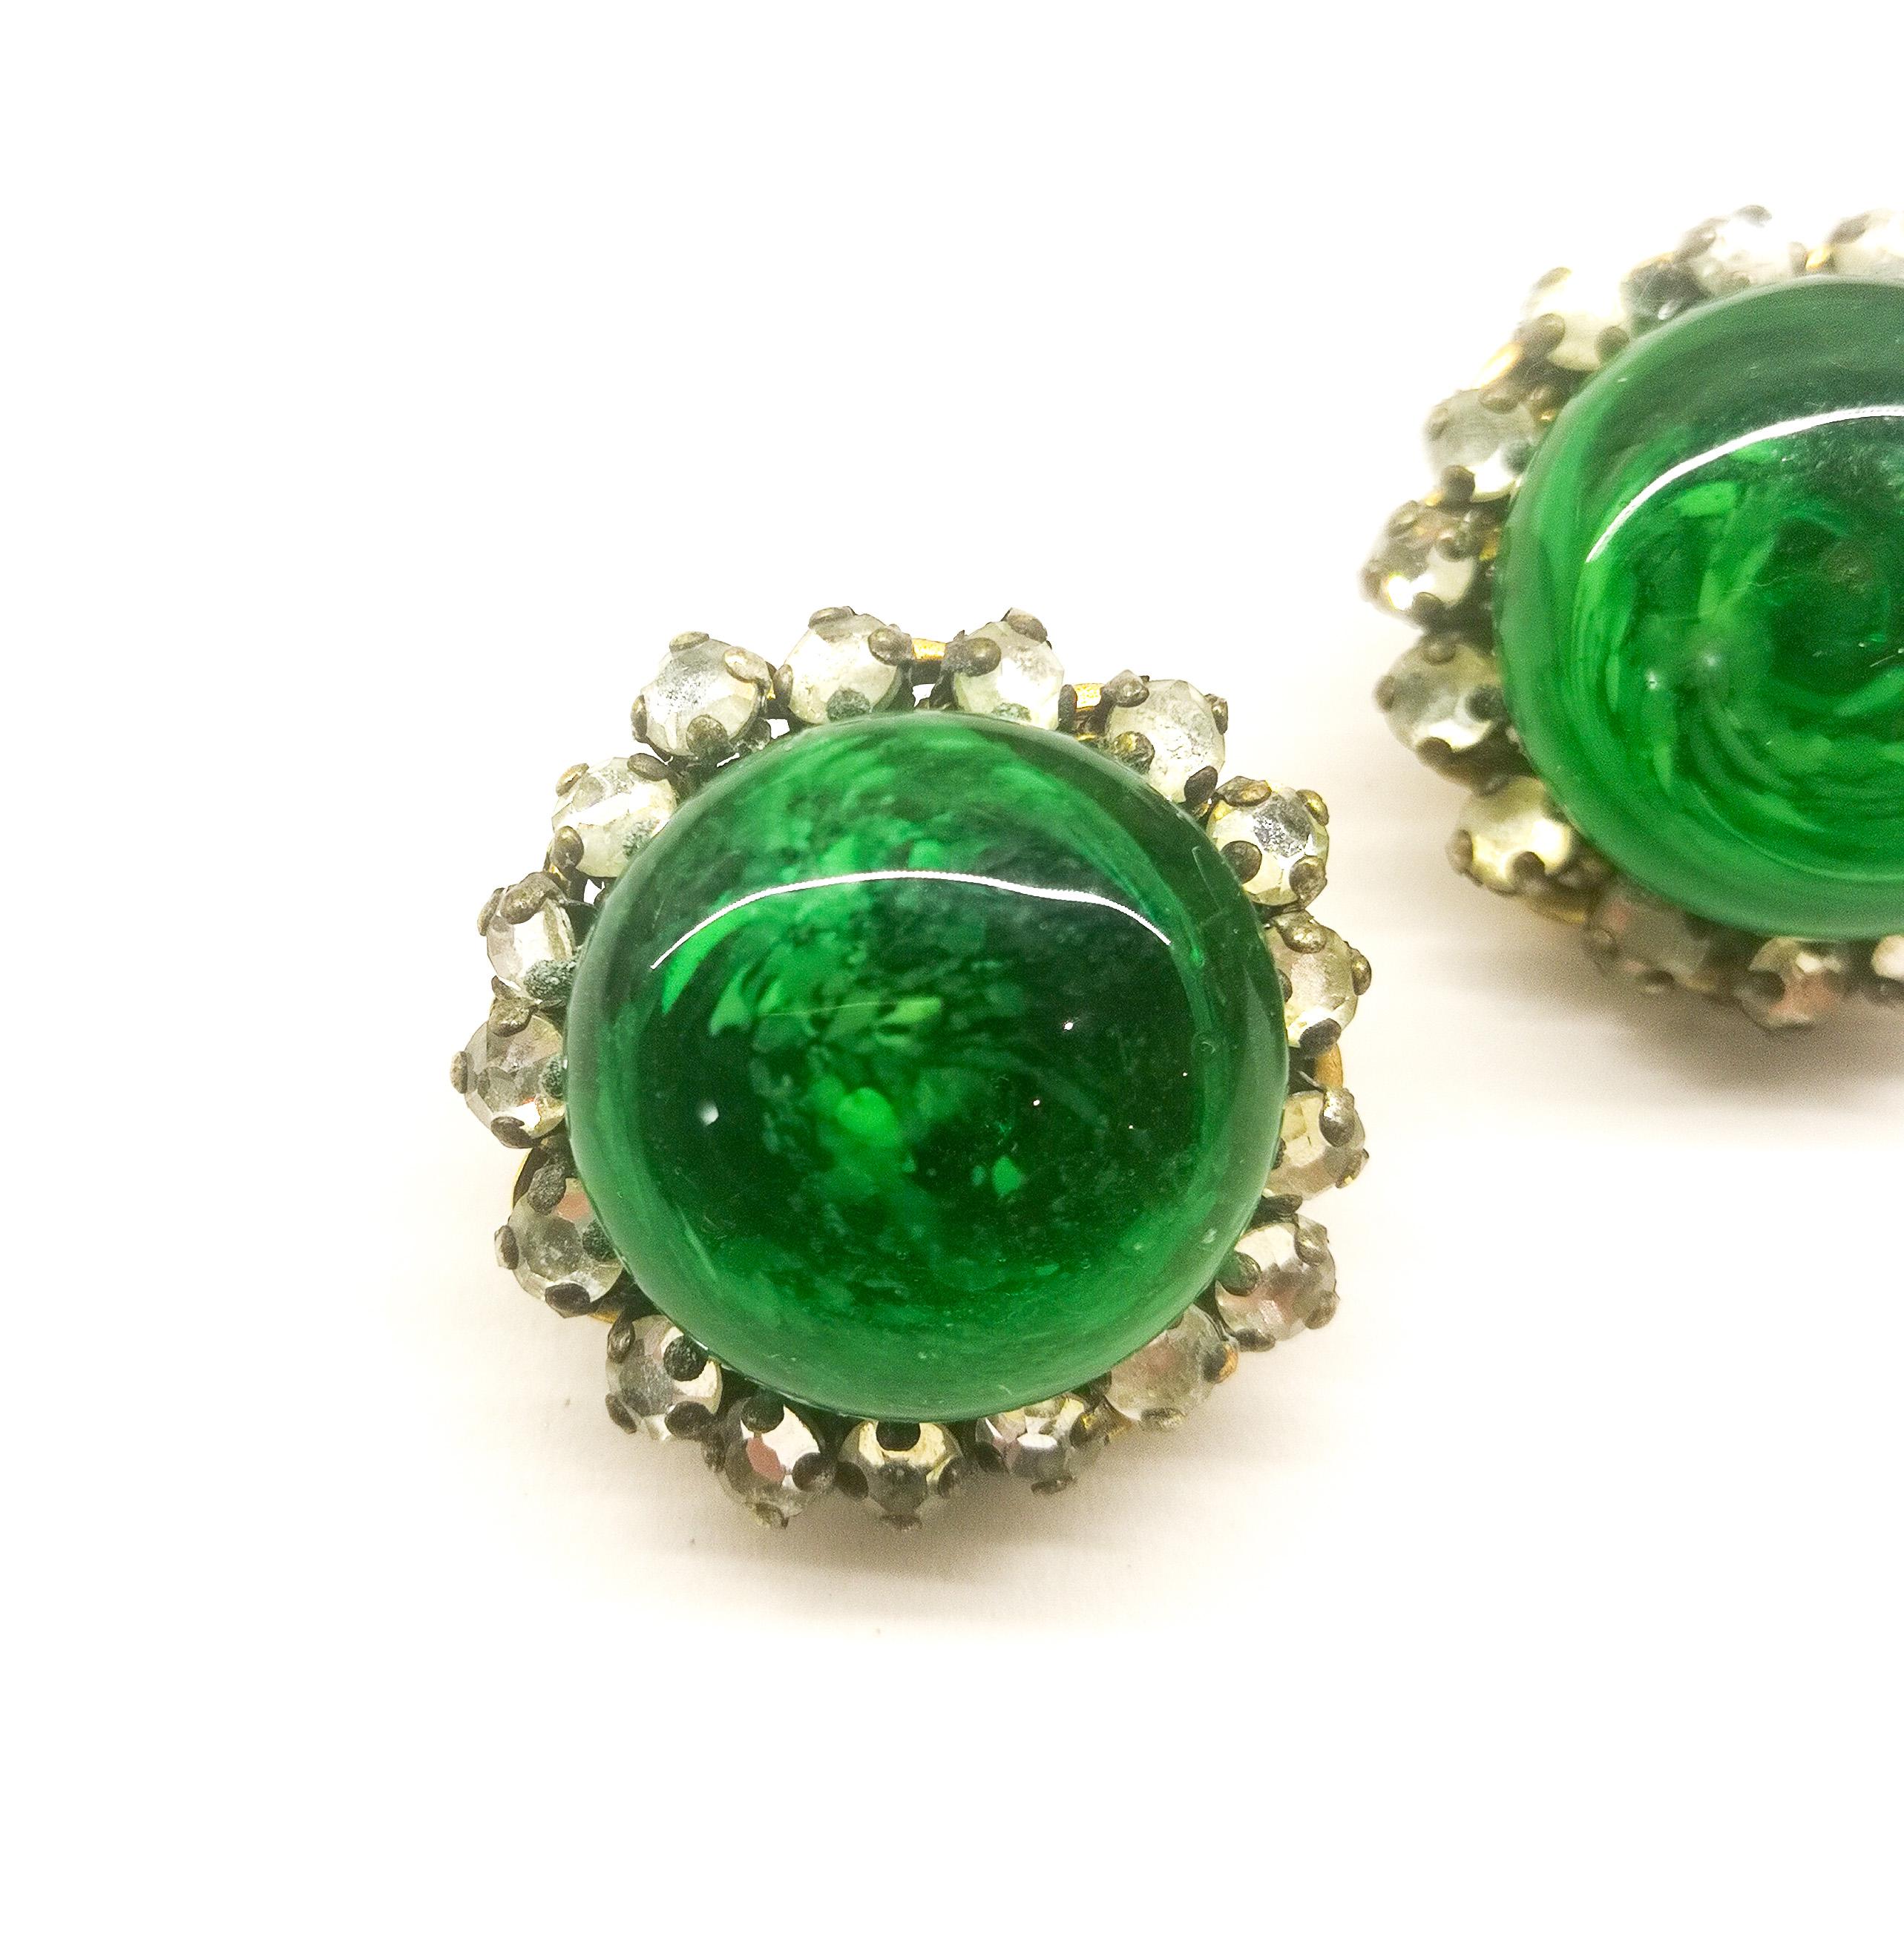 Emerald glass, rose montes and gilt metal button earrings, Miriam Haskell, 1950s 1